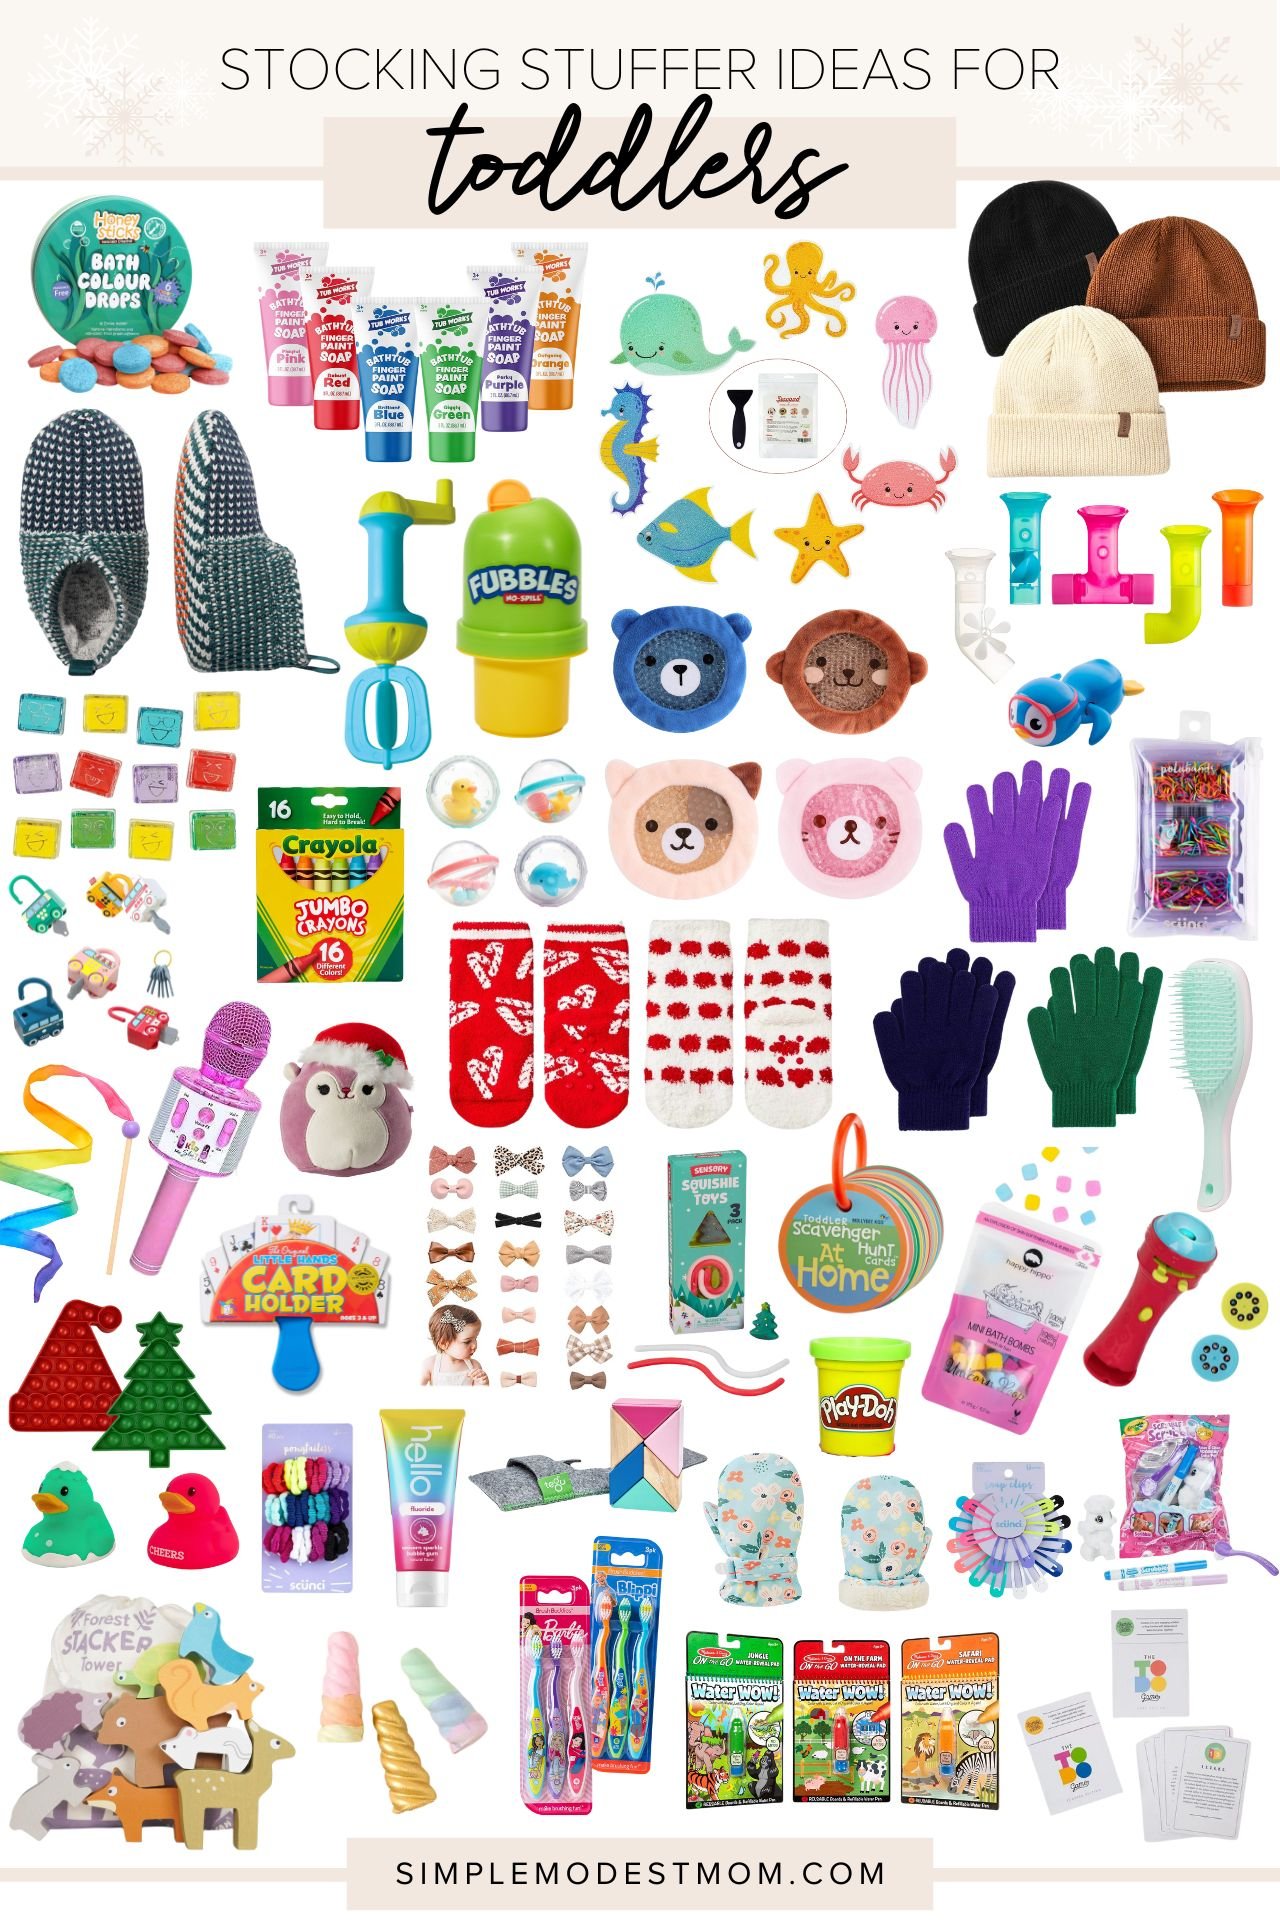 Melissa & Doug On the Go Color by Numbers Kids' Design Board - Unicorns,  Ballet, Kittens, and More - Party Favors, Stocking Stuffers, Travel Toys